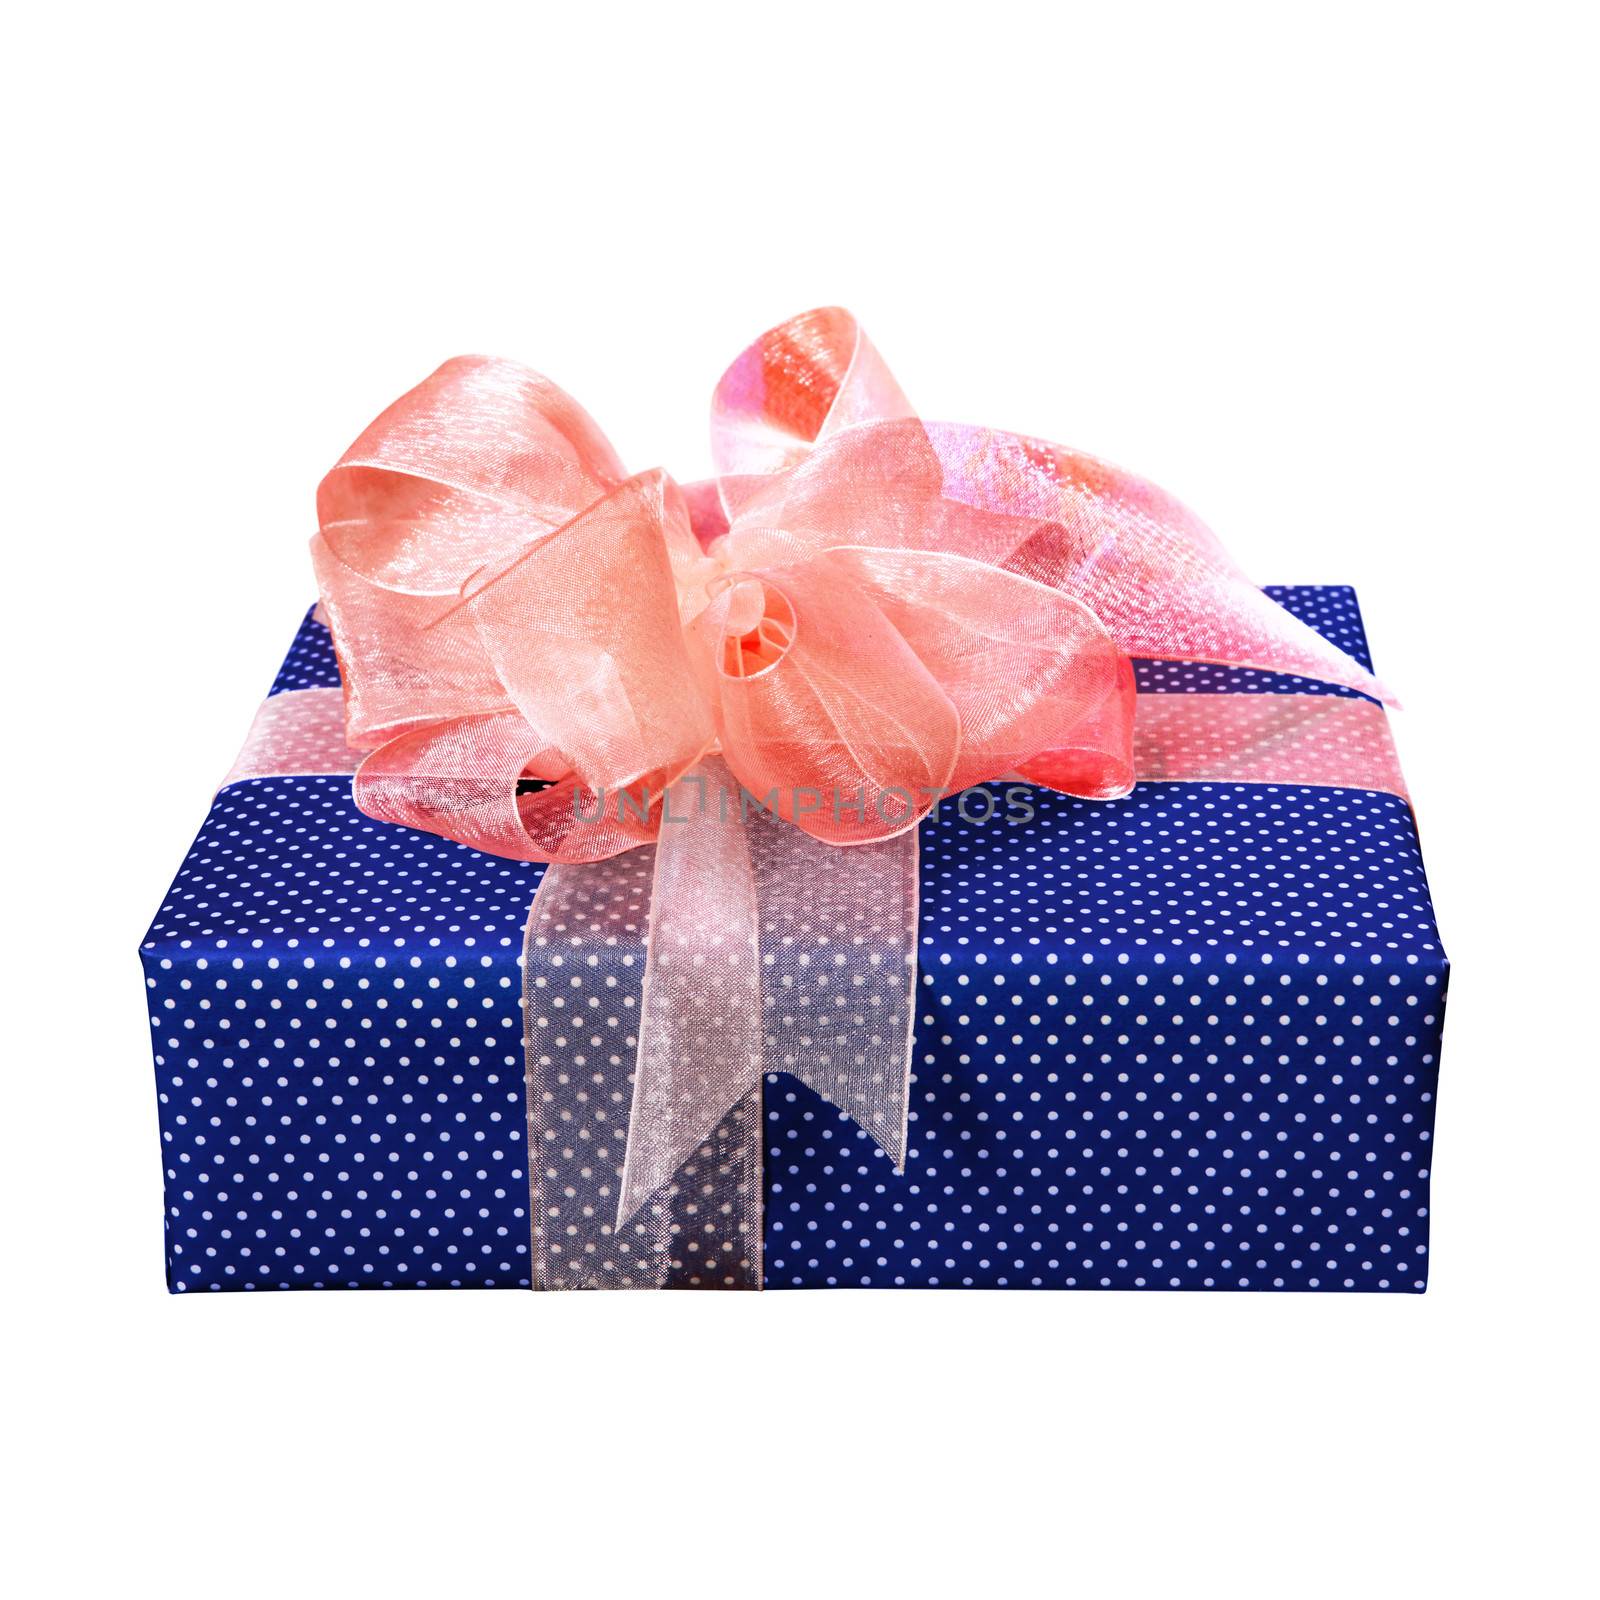 blue gift box and pink ribbon, isolated on white with path